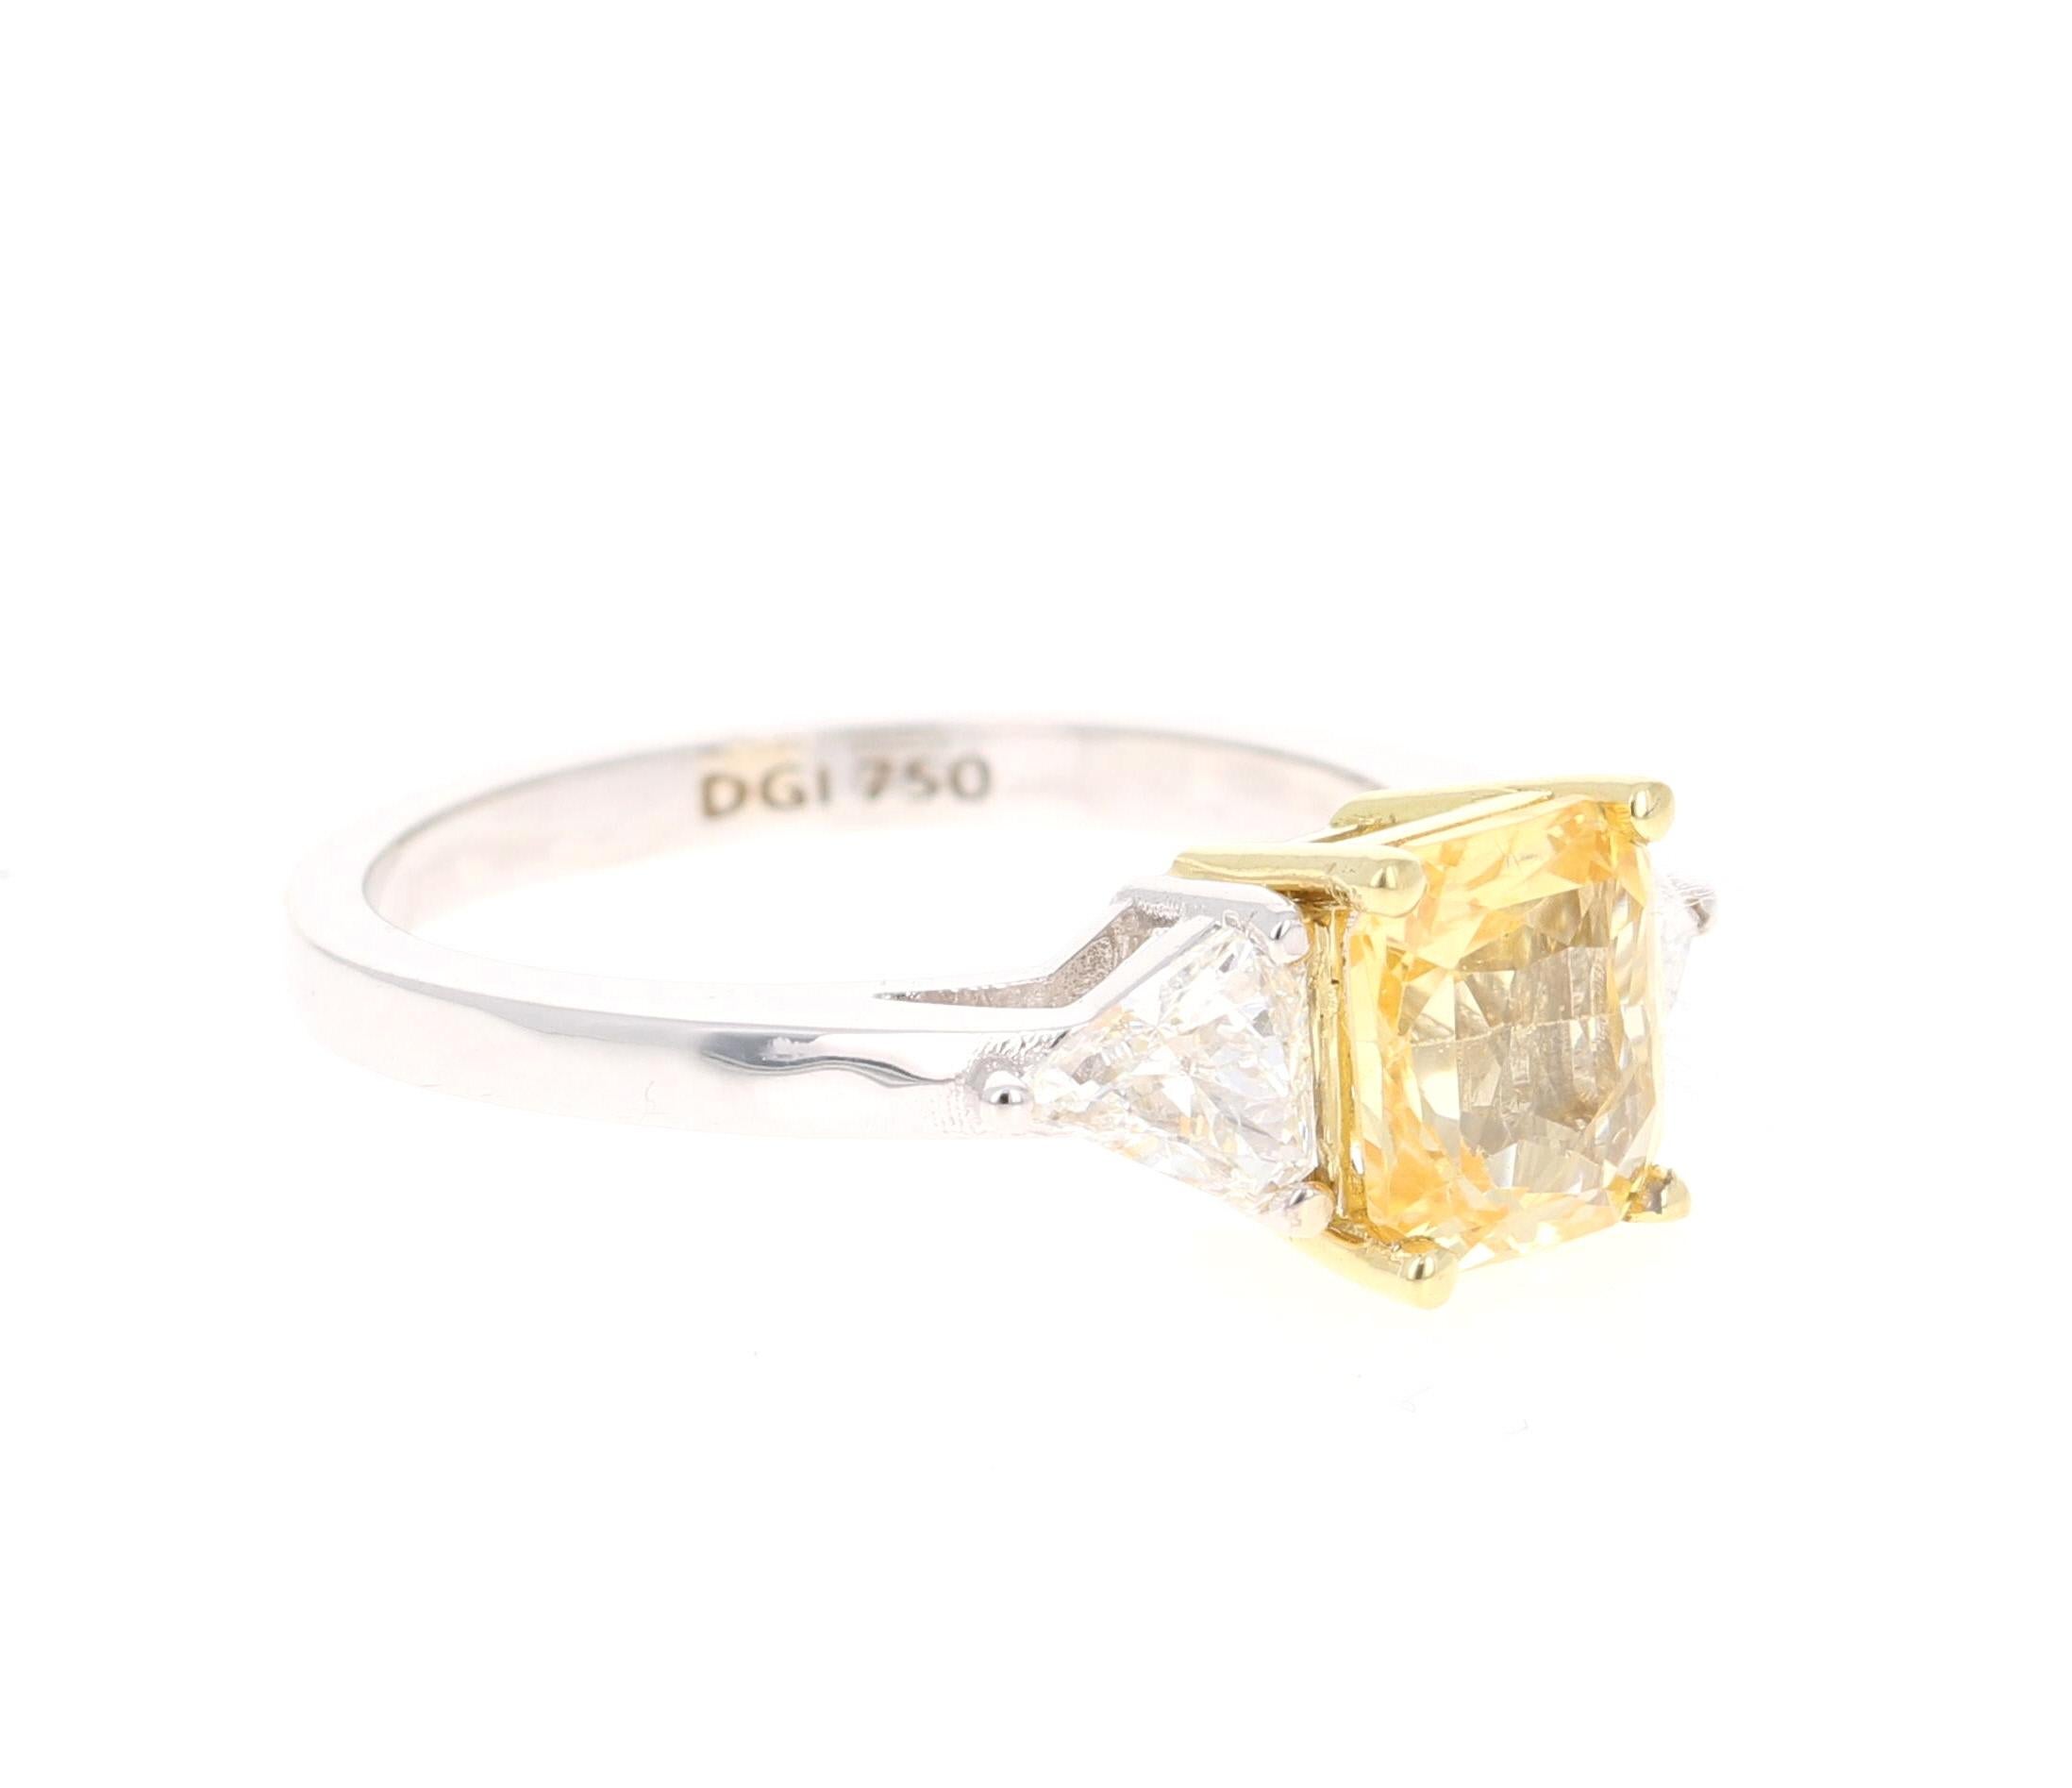 Stunning Natural Yellow Sapphire Non-Heated GIA Certified Three Stone Ring!

This ring has a Cushion Cut Yellow Sapphire that is GIA Certified. GIA Certificate number is: 2191734259. The Yellow Sapphire is natural and is a non-heated stone. This